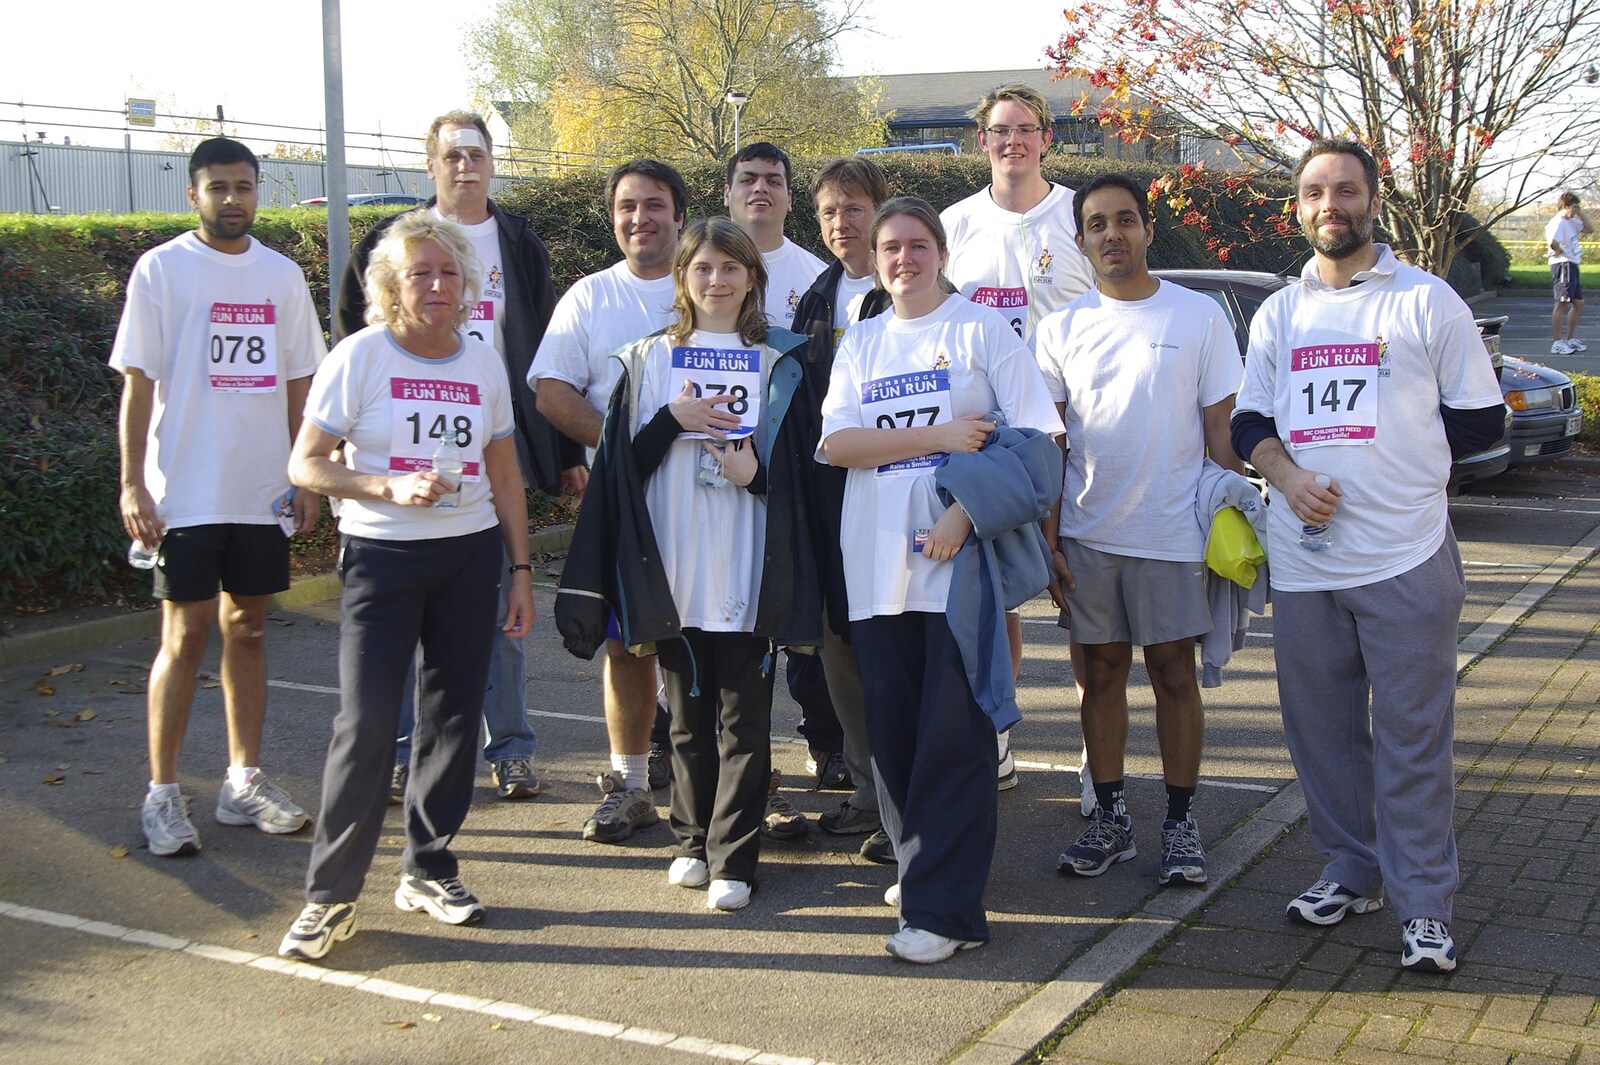 Isobel and the Science Park Fun Run, Milton Road, Cambridge - 16th November 2007: Another Team Qualcomm photo